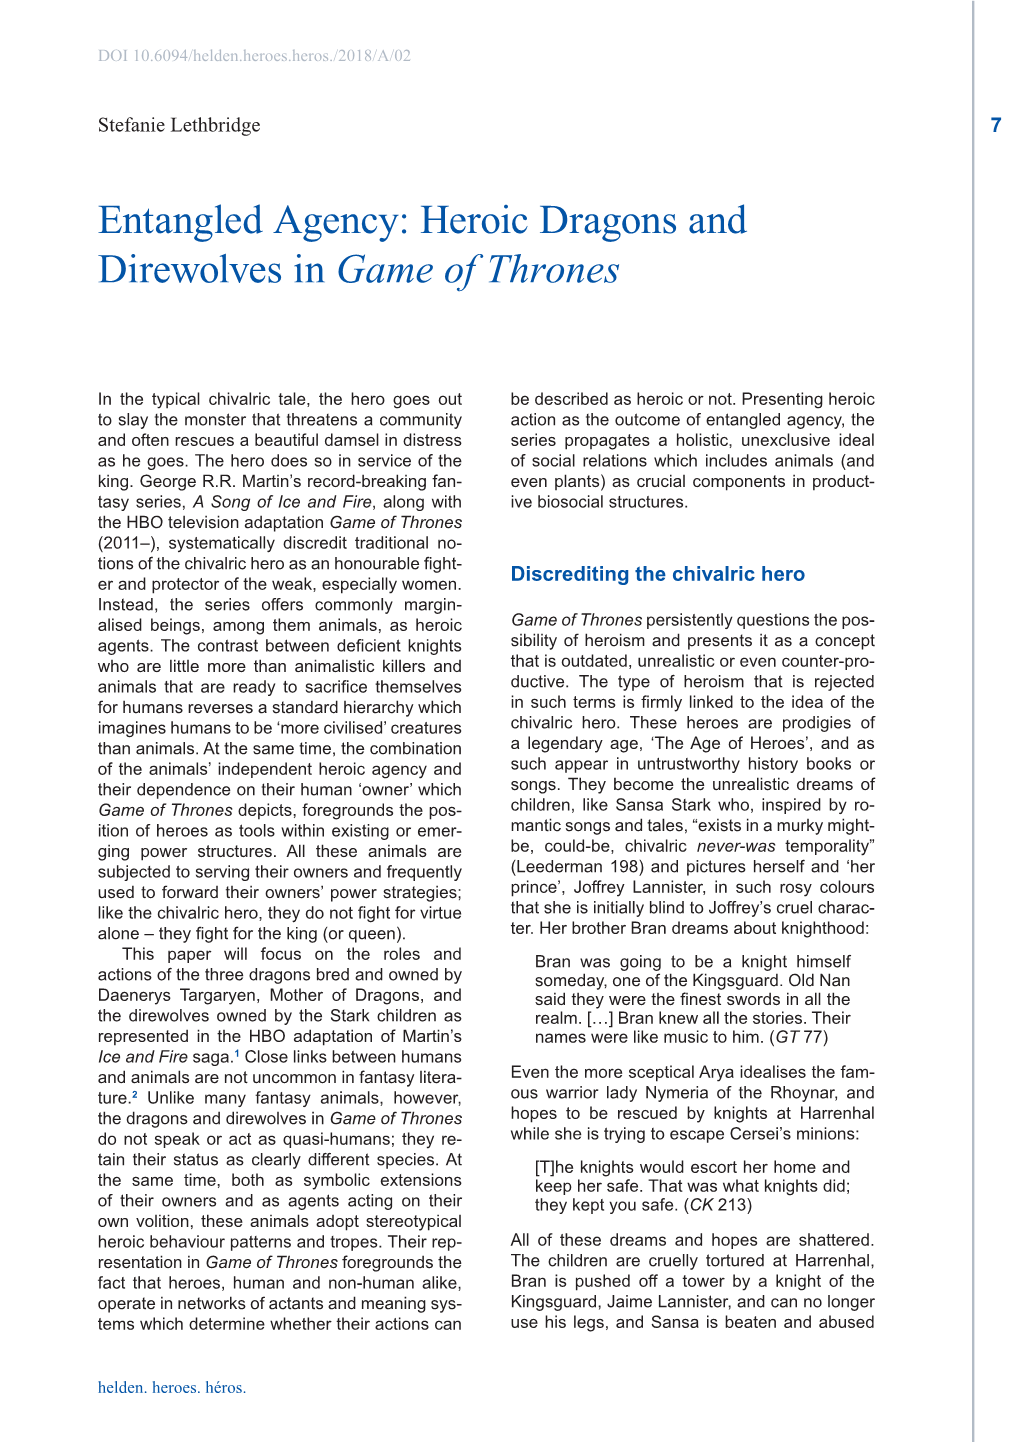 Heroic Dragons and Direwolves in Game of Thrones